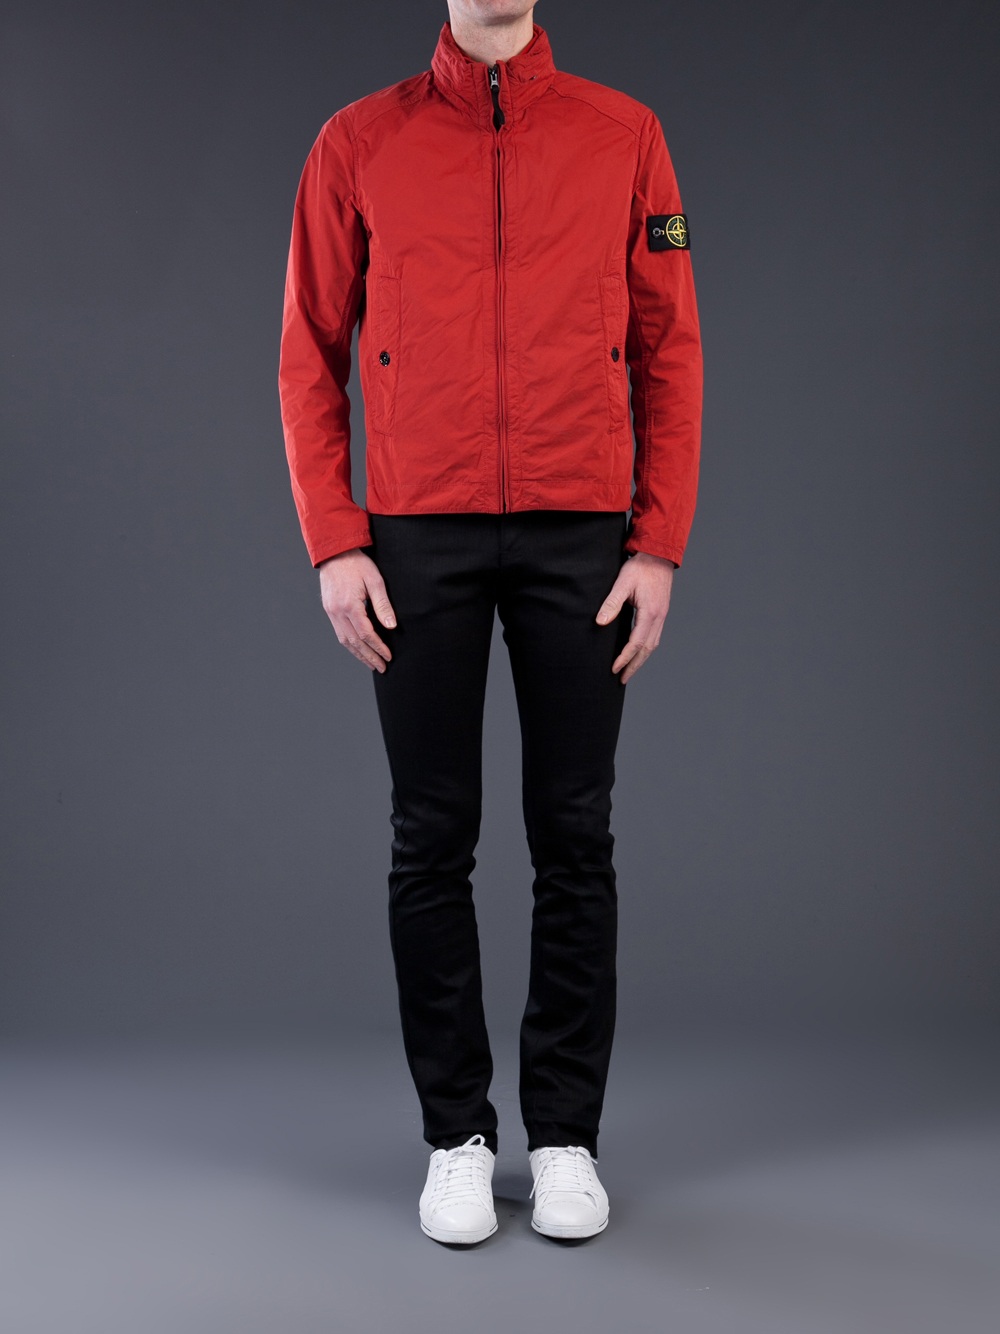 Stone Island Lightweight Jacket in Red for Men - Lyst